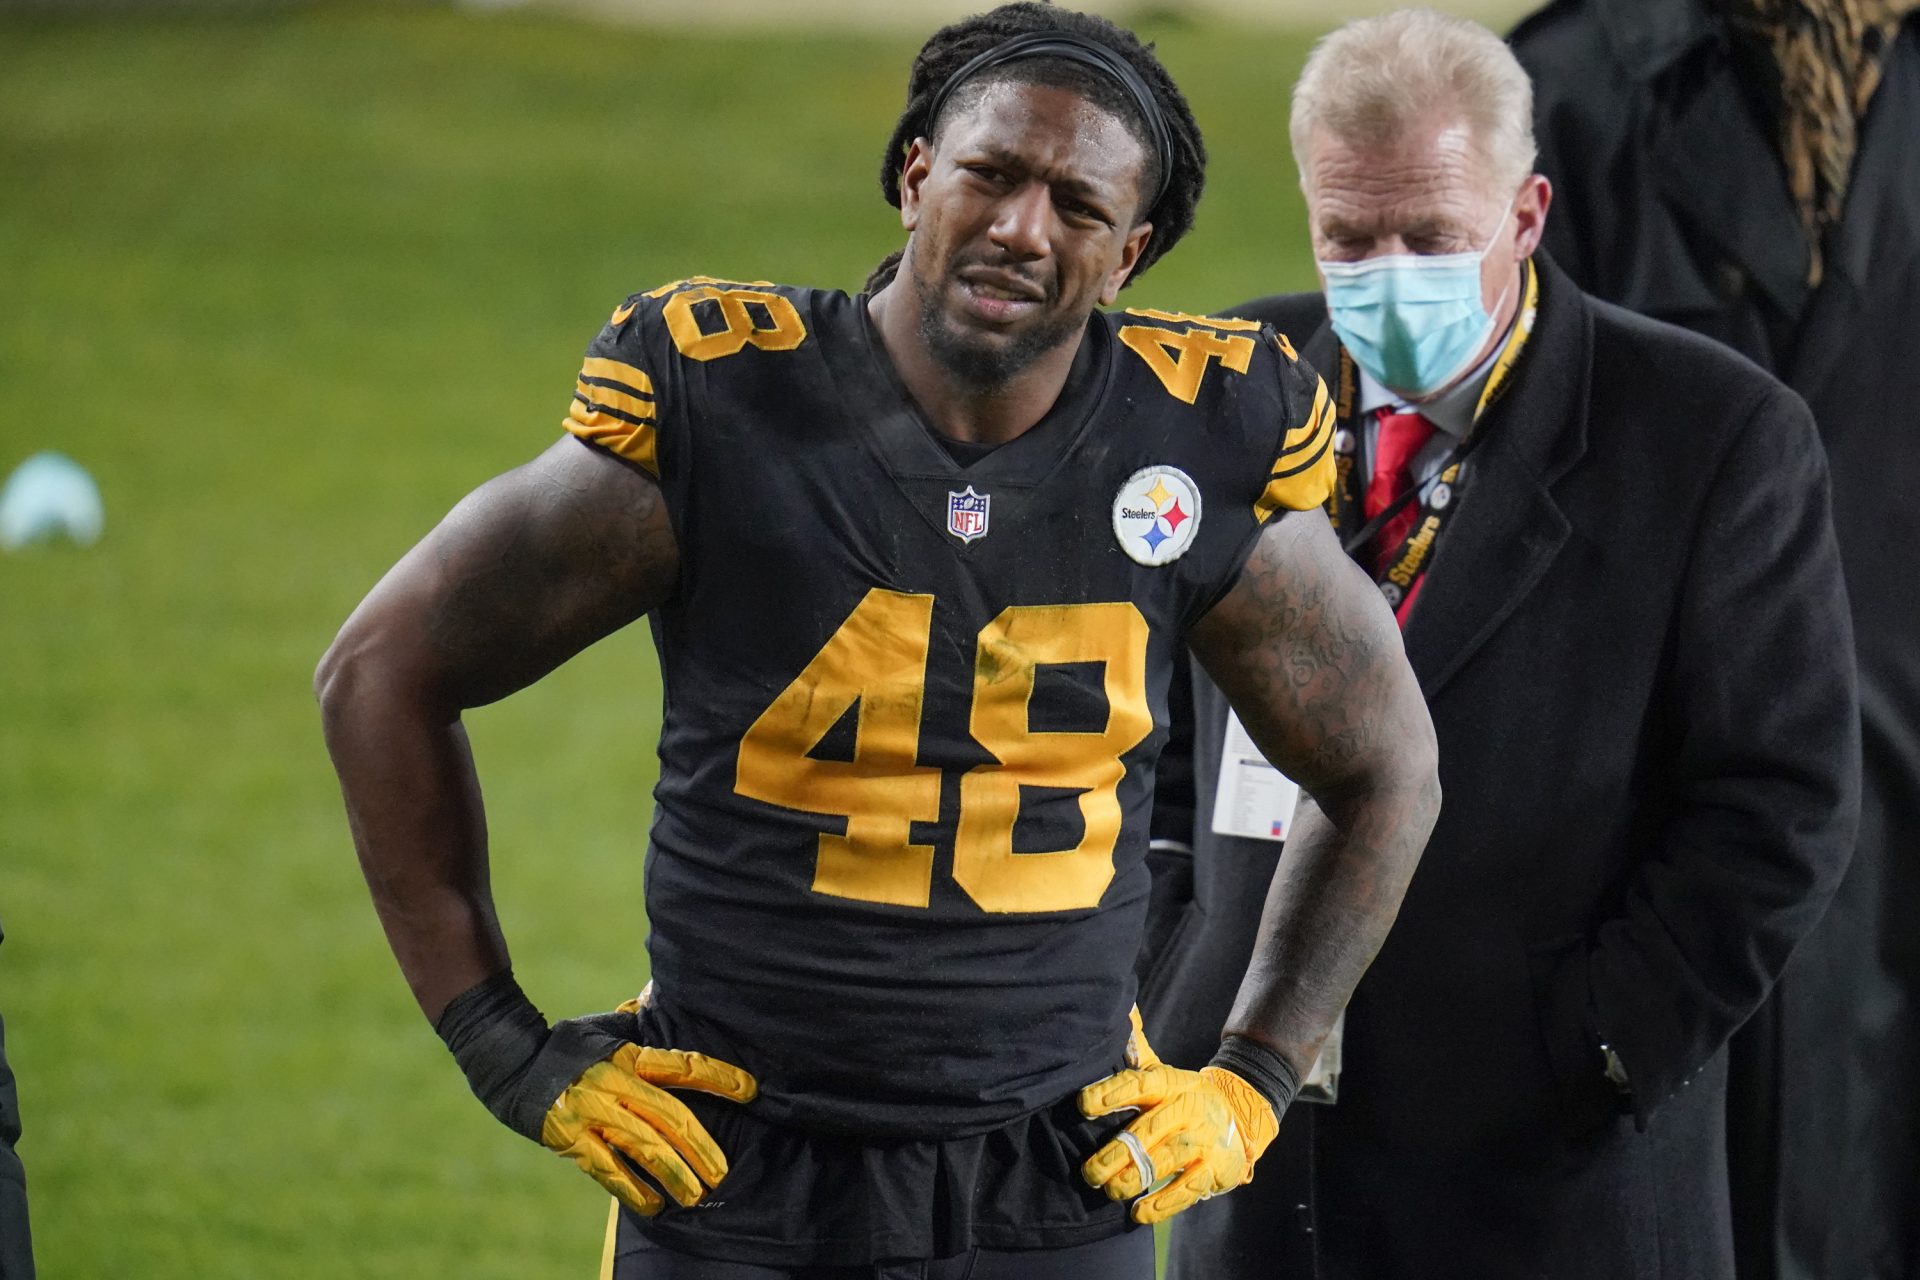 Pittsburgh Steelers outside linebacker Bud Dupree grimaces as walks on the sideline after being injured playing against the Baltimore Ravens during an NFL football game Wednesday, Dec. 2, 2020, in Pittsburgh.